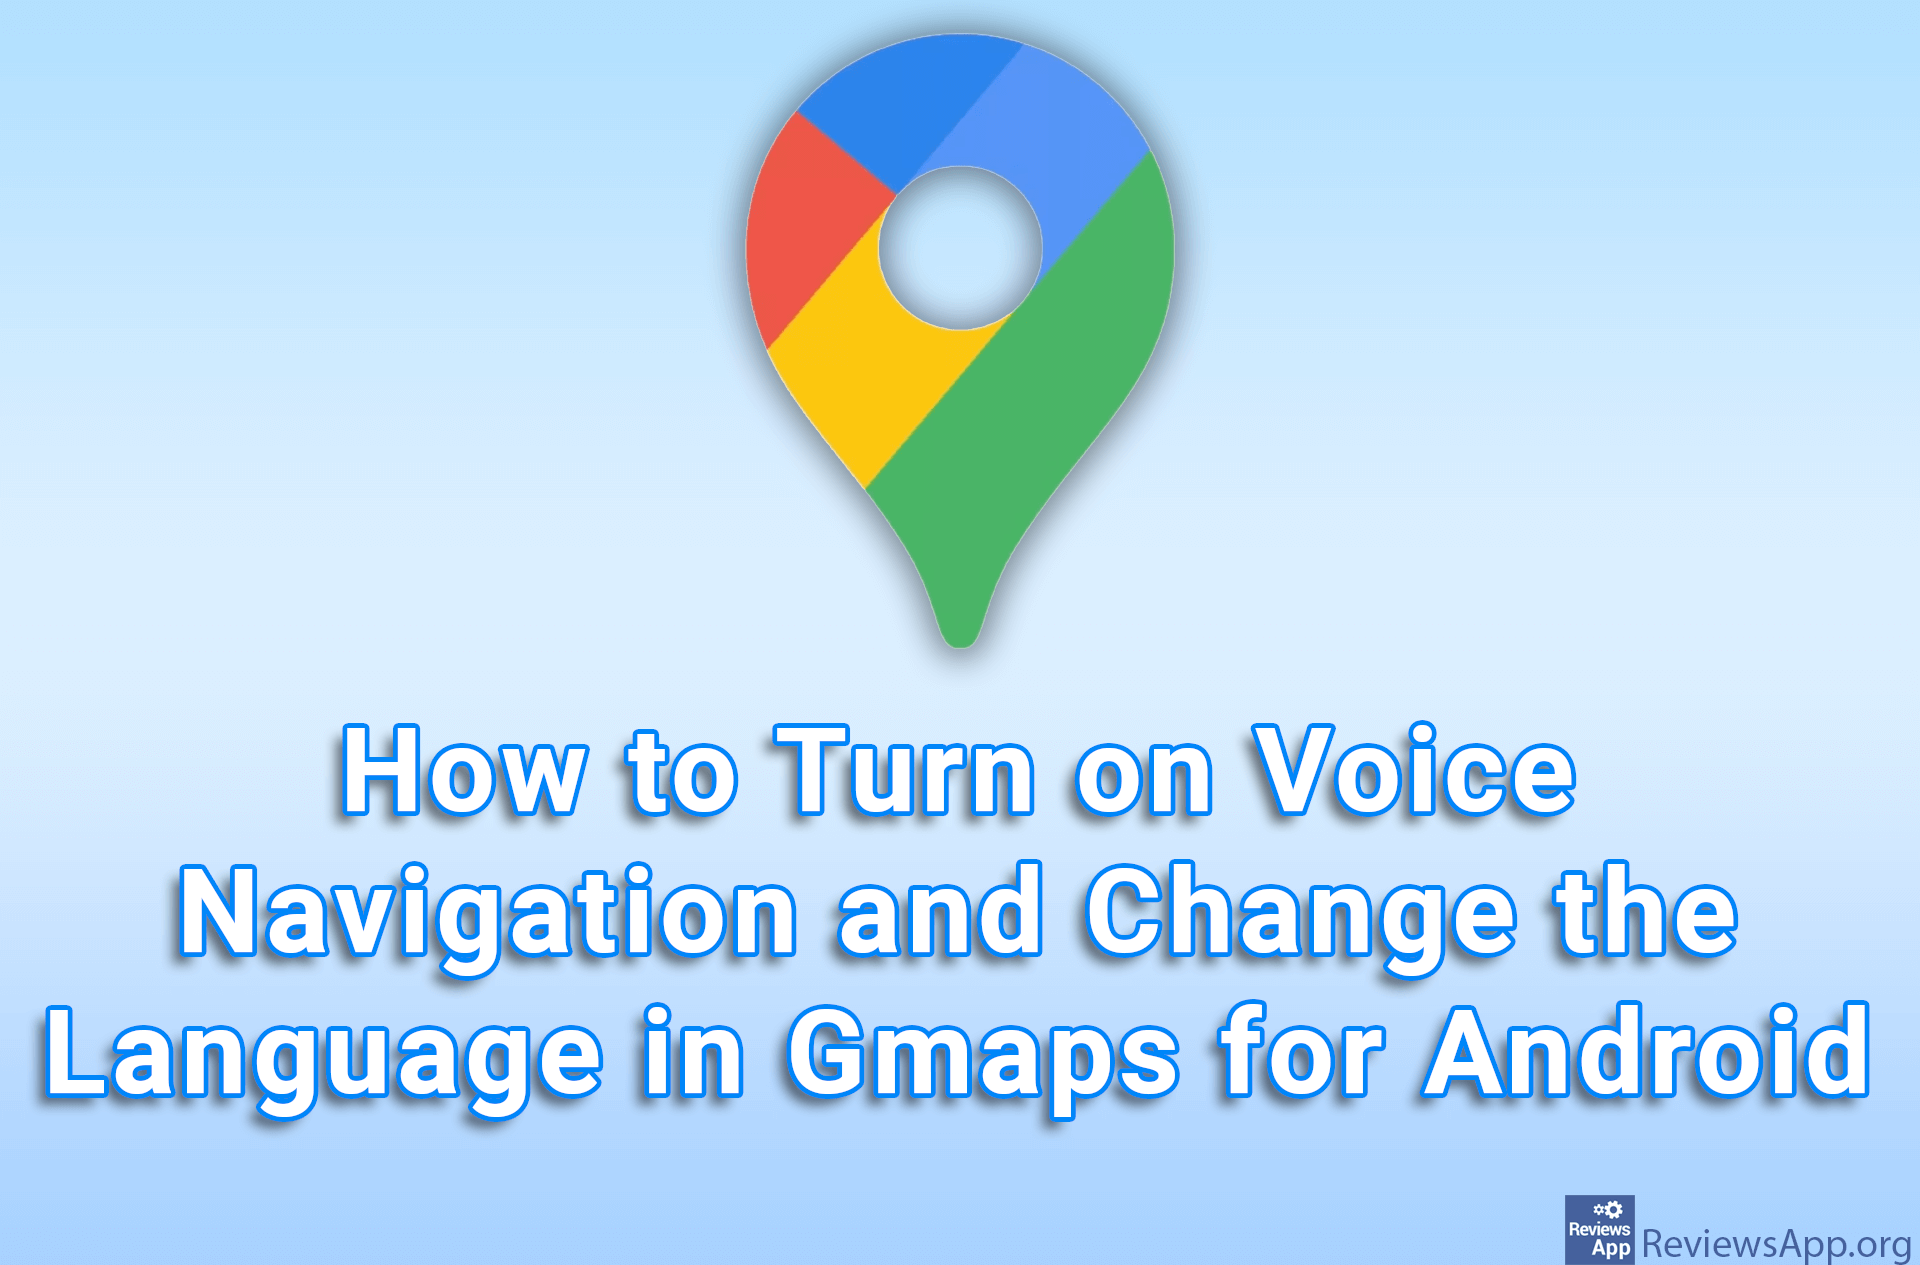 How to Turn on Voice Navigation and Change the Language in Gmaps for Android